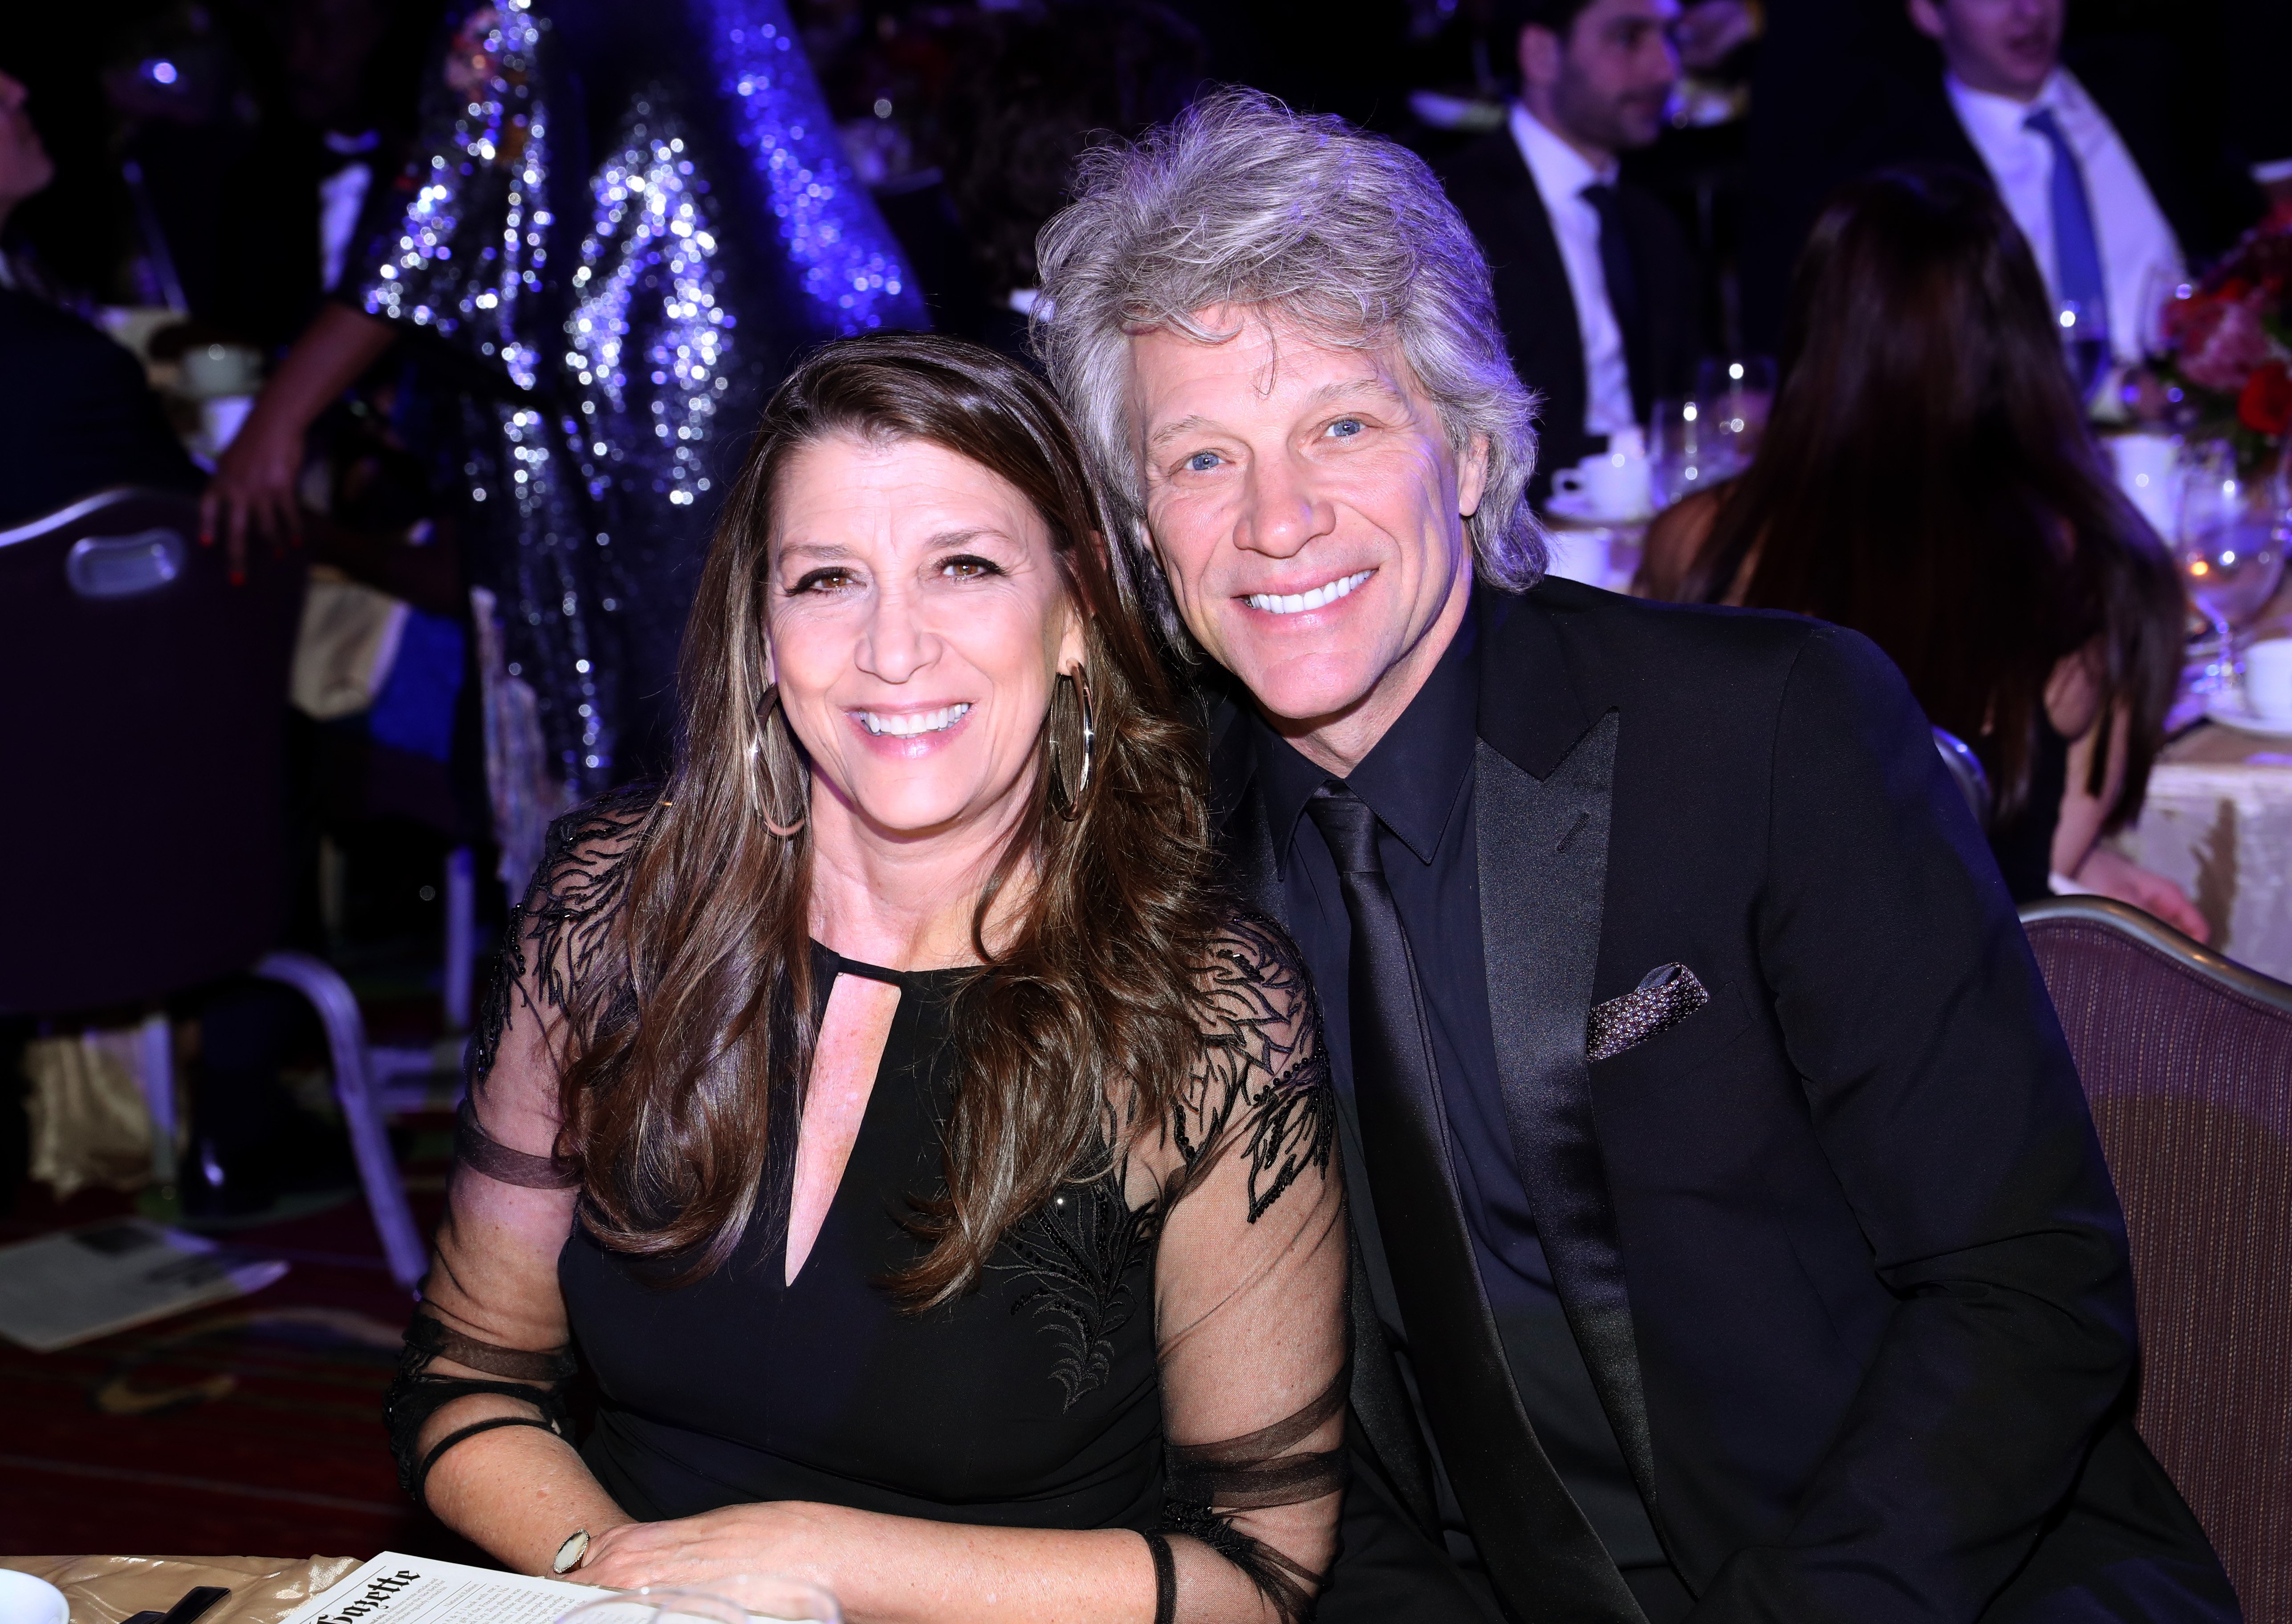 Dorothea Hurley and Jon Bon Jovi attending Jackie Robinson Foundation Robie Awards Dinner at Marriot Marquis on March 02, 2020 in New York City. / Source: Getty Images